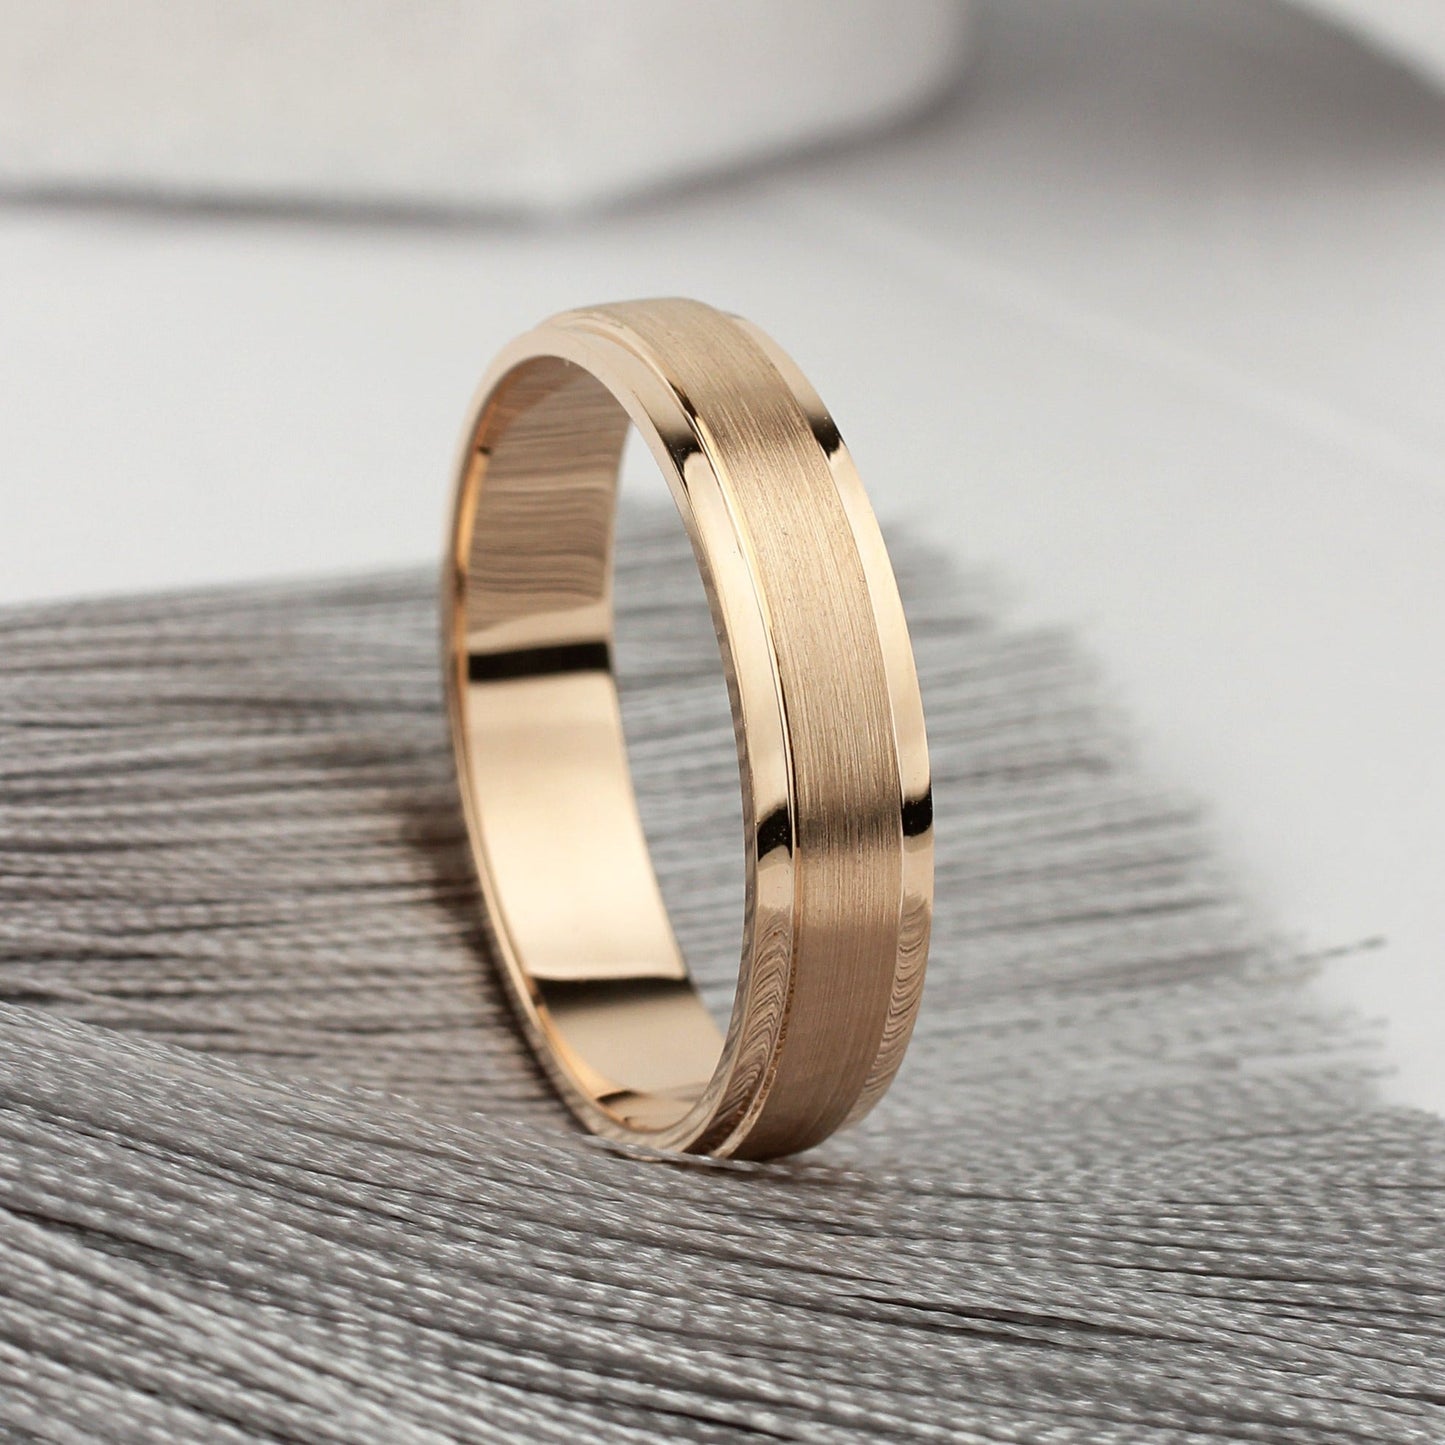 Men's wedding ring with matte and polished finish - escorialjewelry